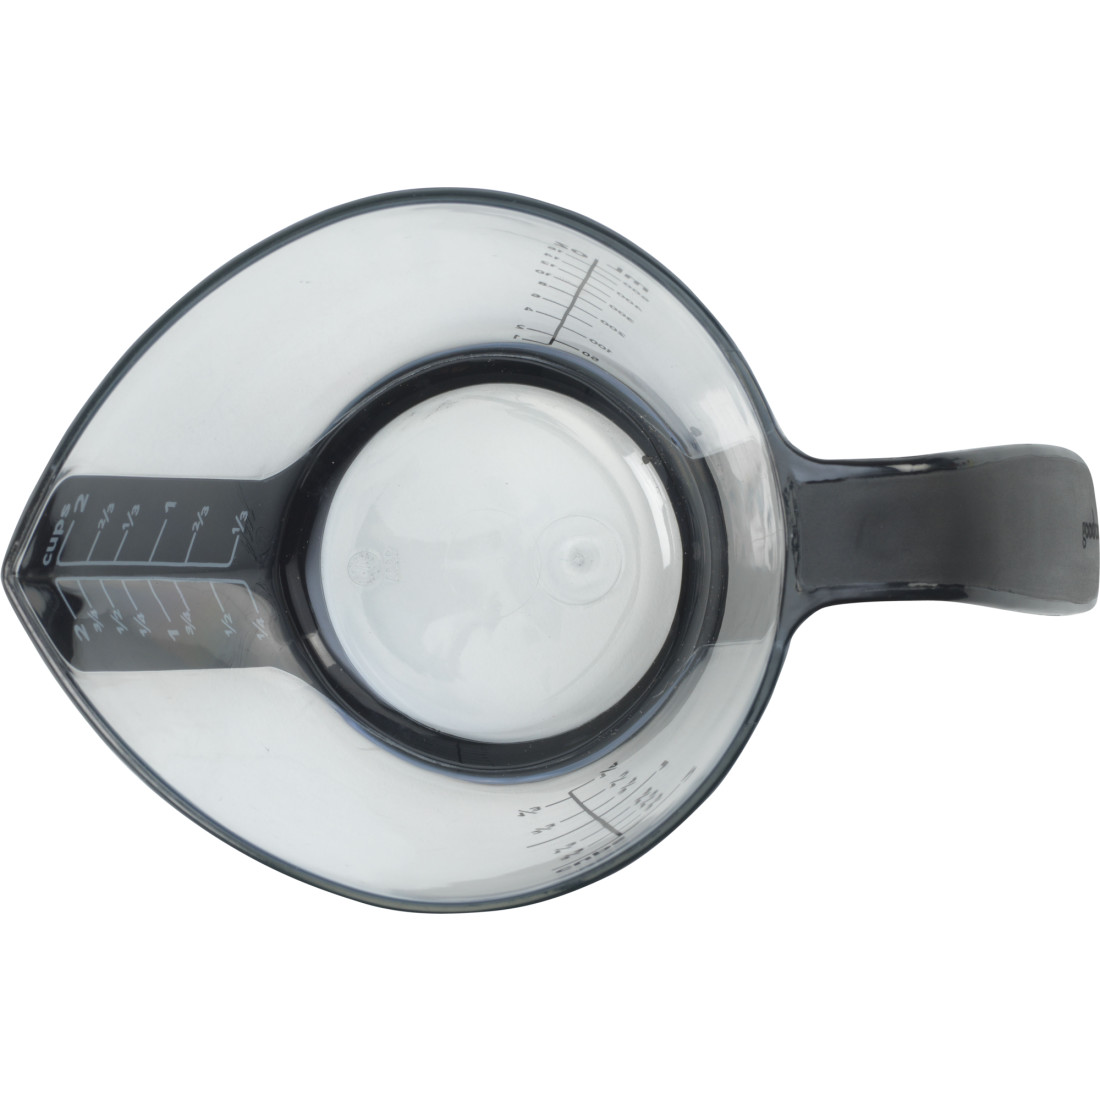 GoodCook Touch Mini Measuring Cup, 1/4-cup Top-Down View, Comfort Grip  Handle